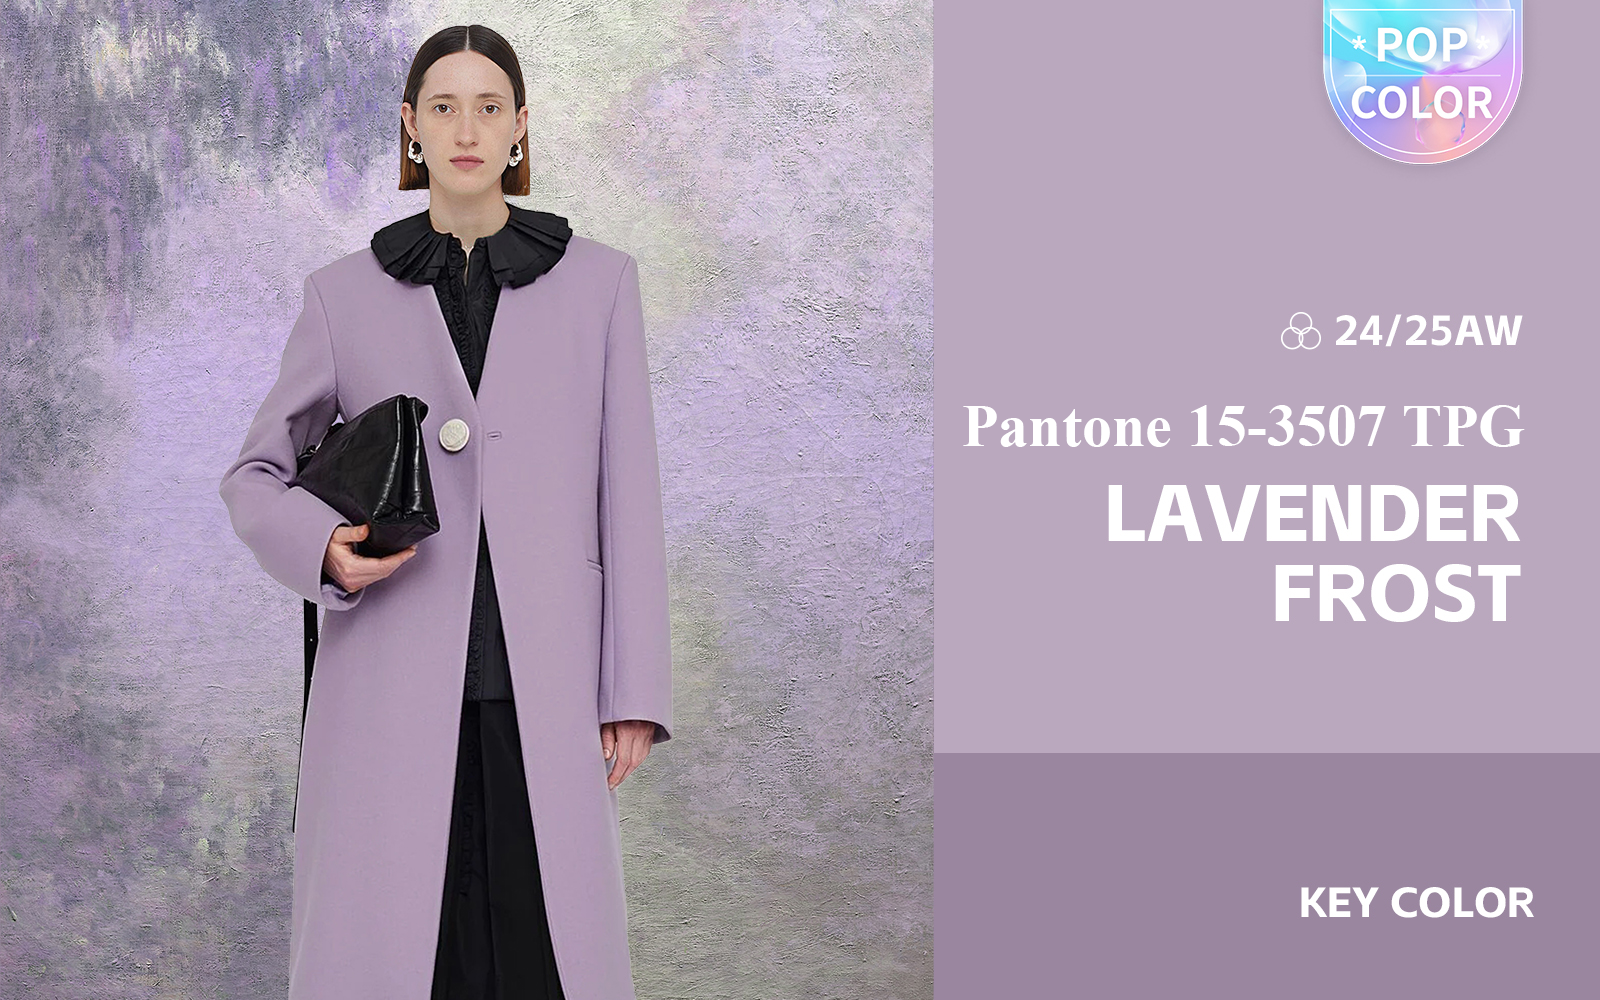 Lavender Frost -- The Color Trend for Womenswear